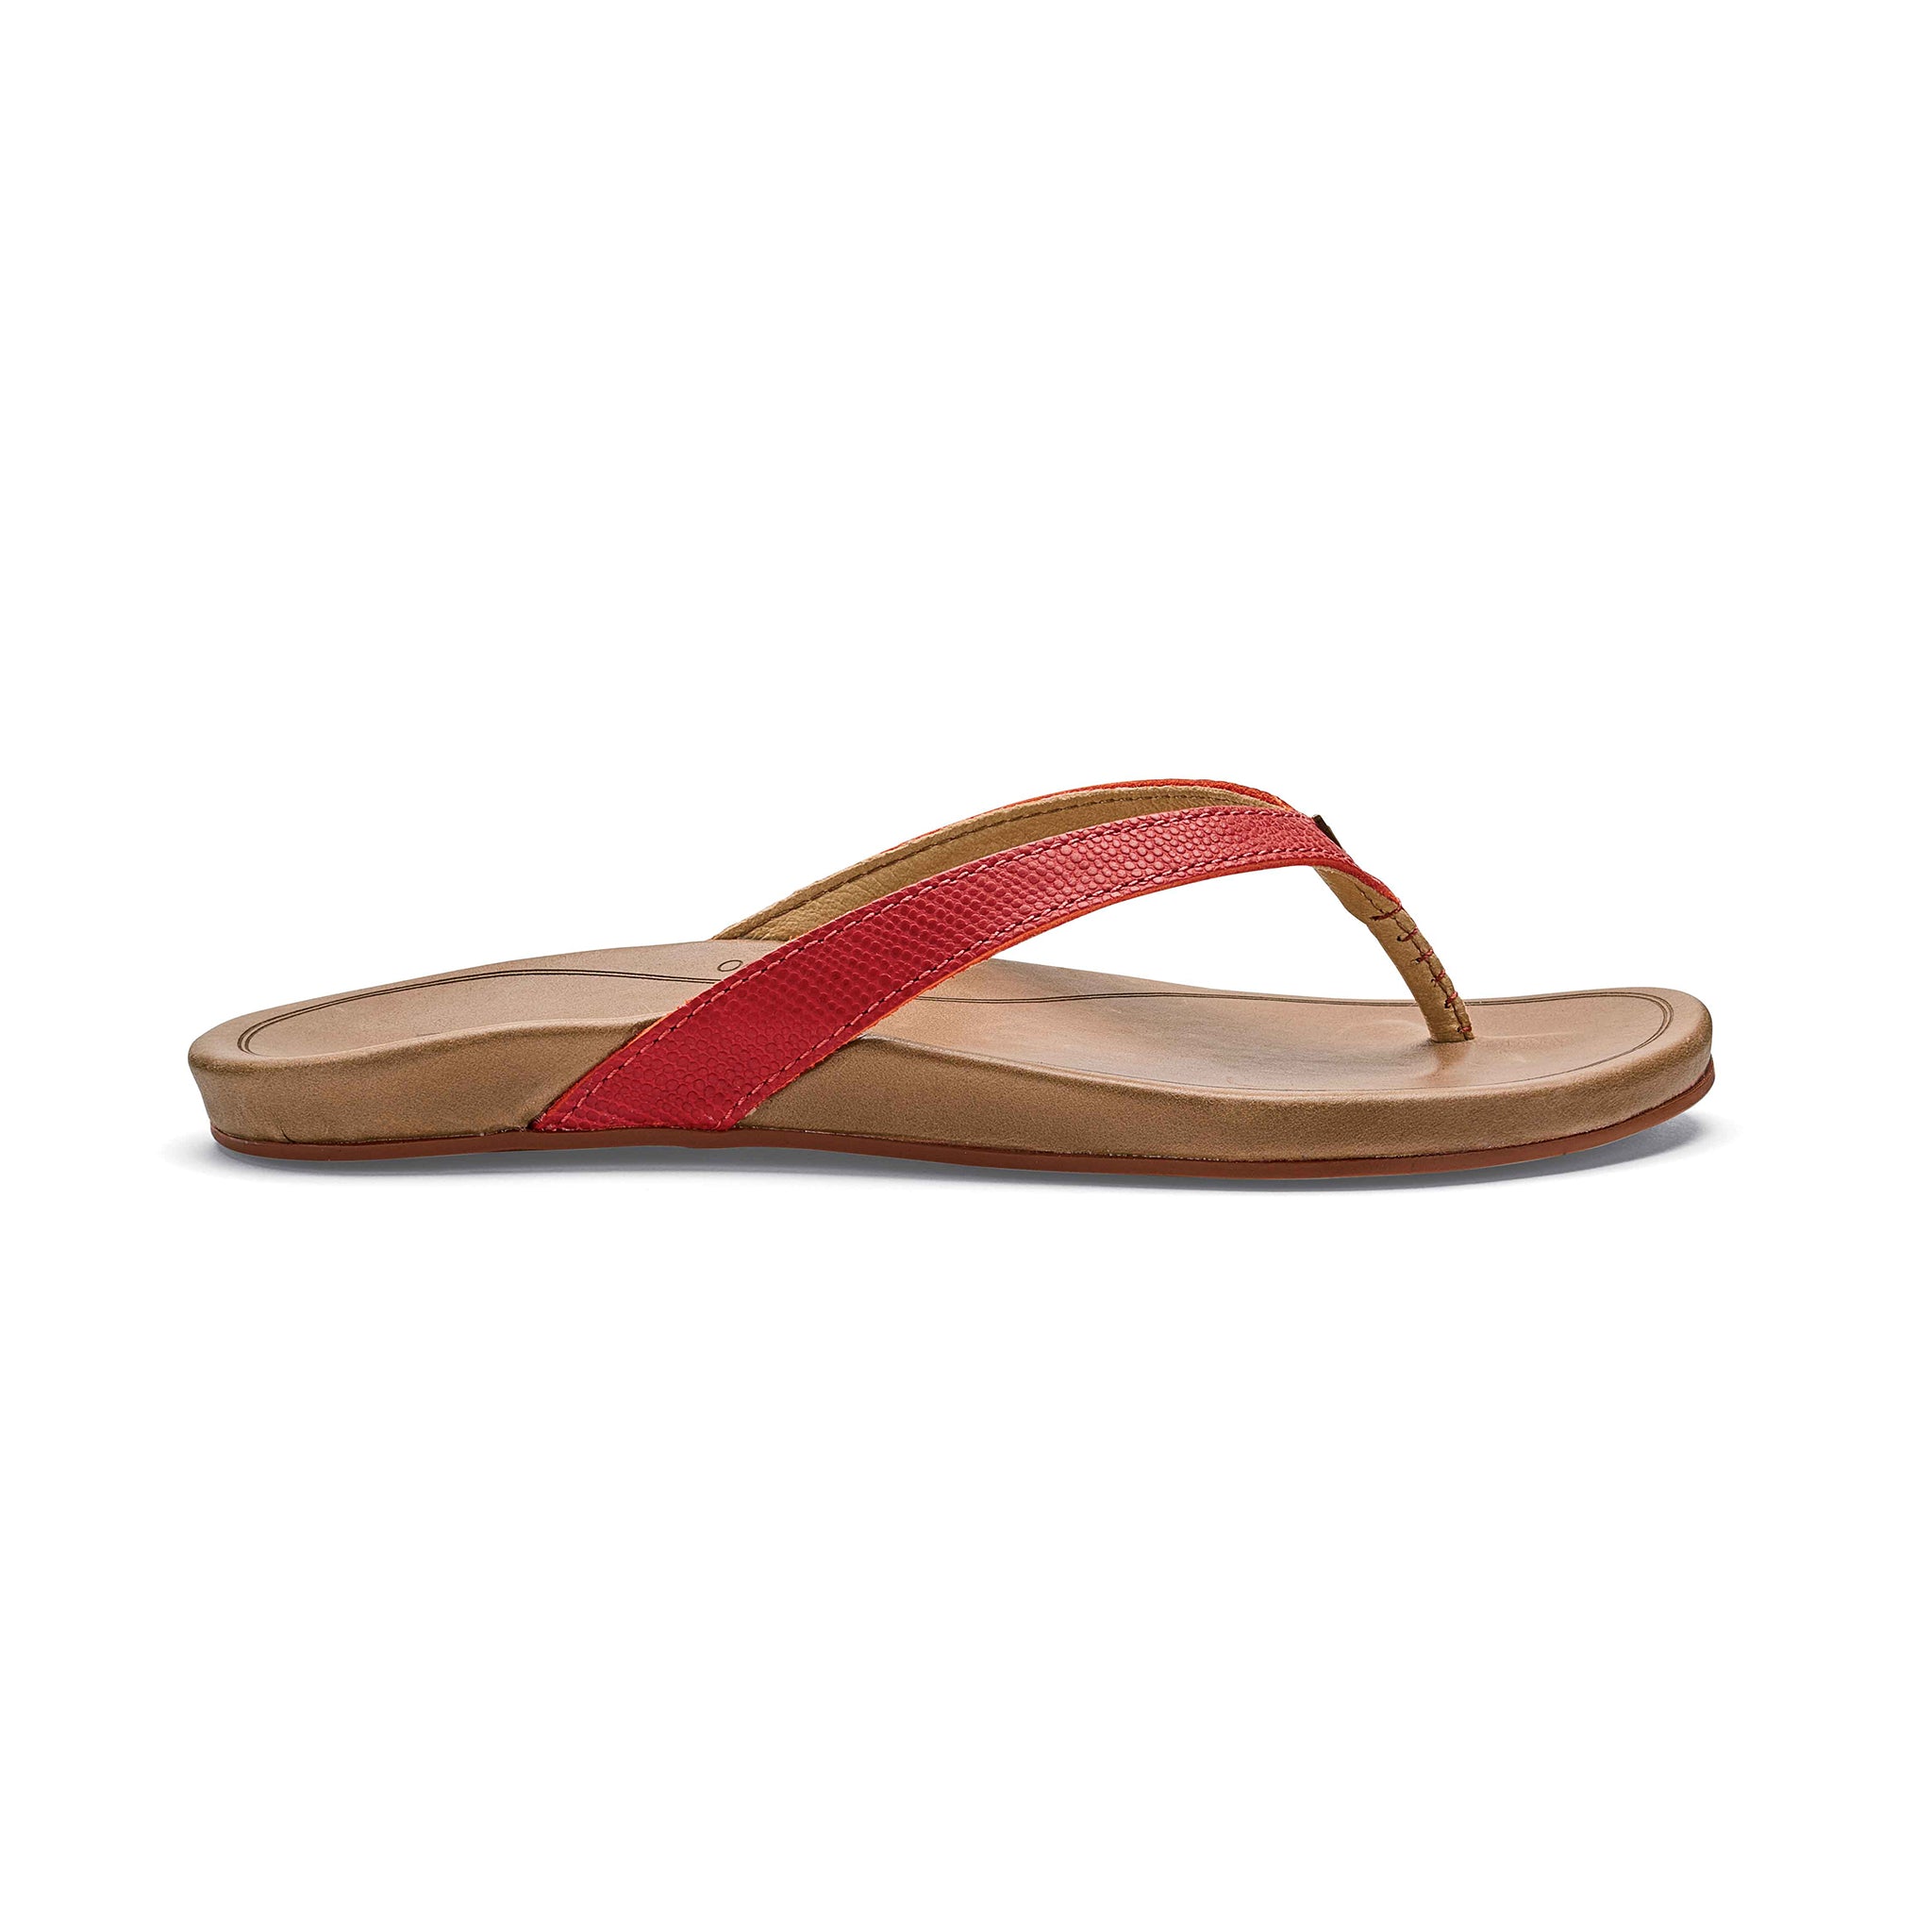 OluKai Women's Best Sellers Collection - Best Selling 5 Star Reviews